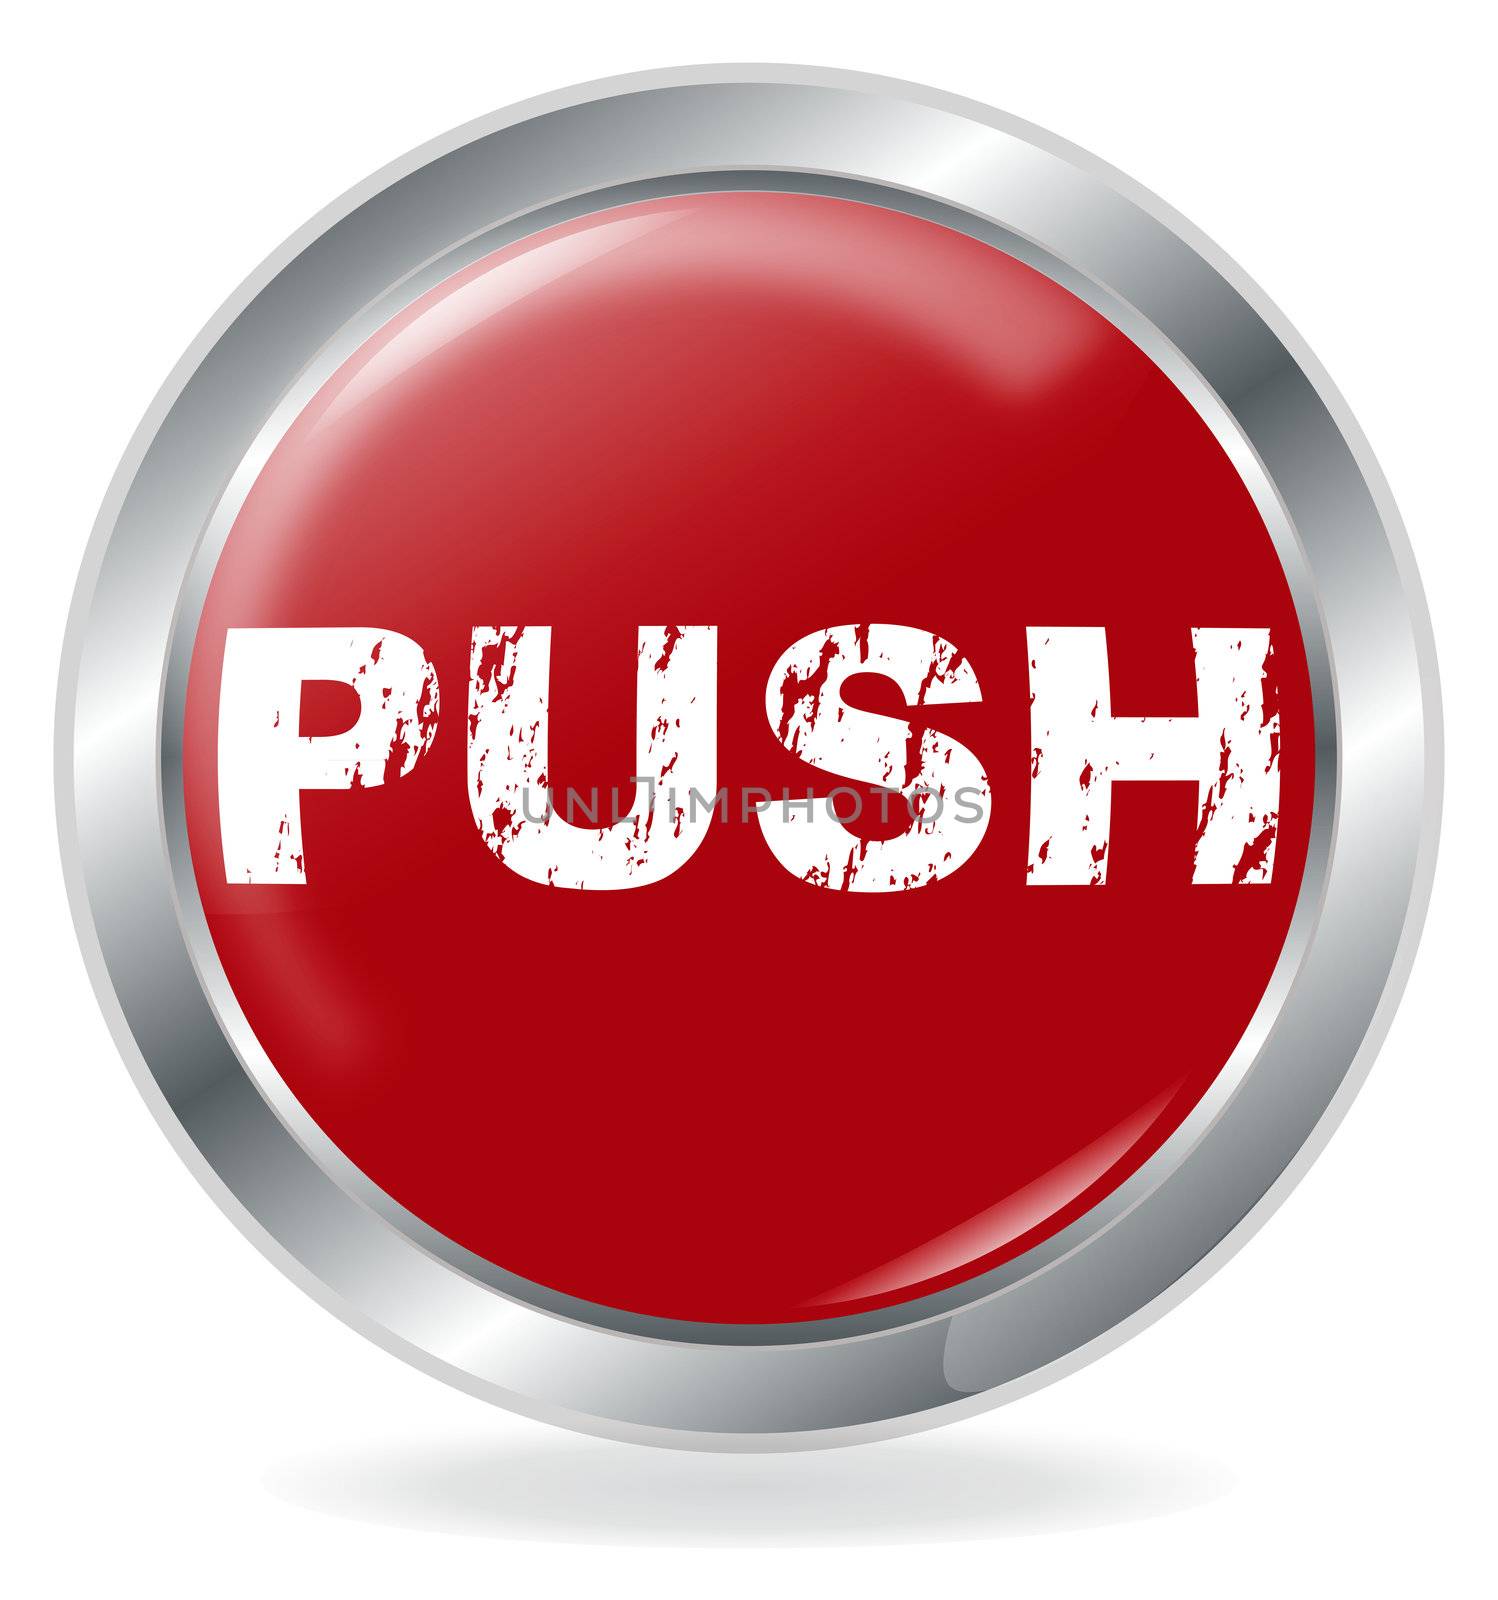 Push button by Bestpictures